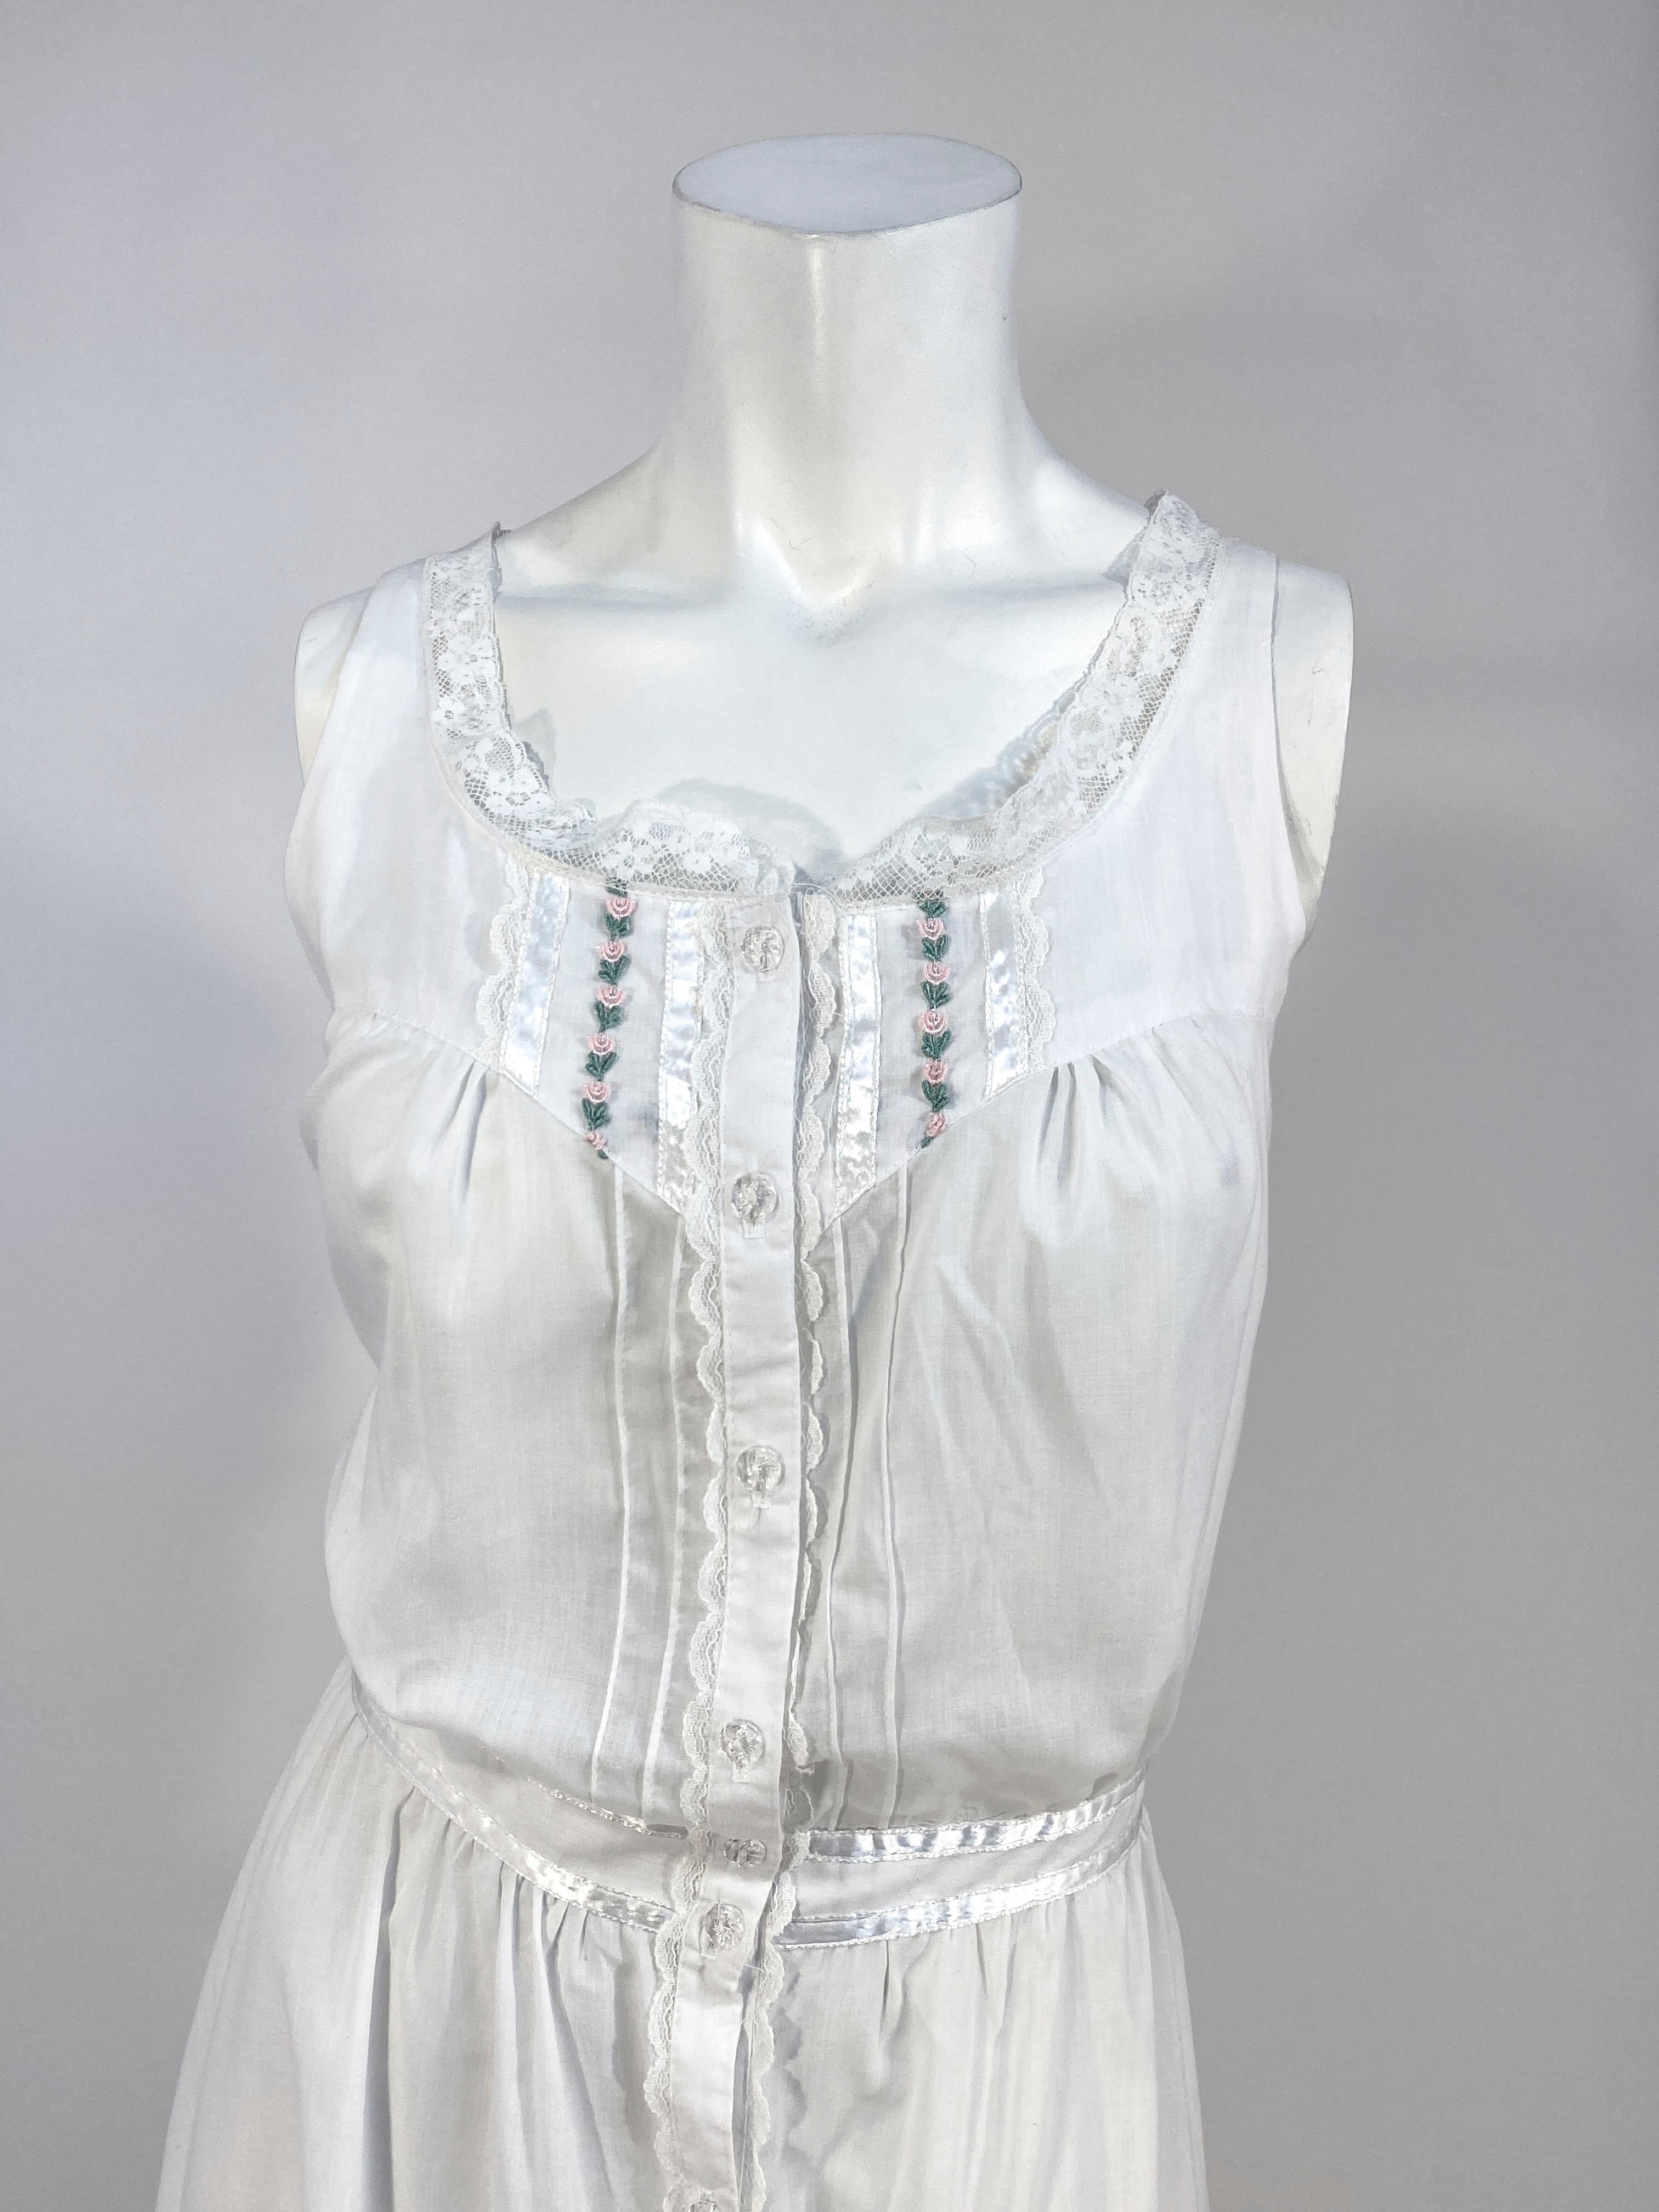 1970s Gunne Sax white cotton day dress with machine lace trim/embroidery, clear button front closure, pin pleats, gathers, wide ruffled hem, and a double piped waist with adjustable attached sash .